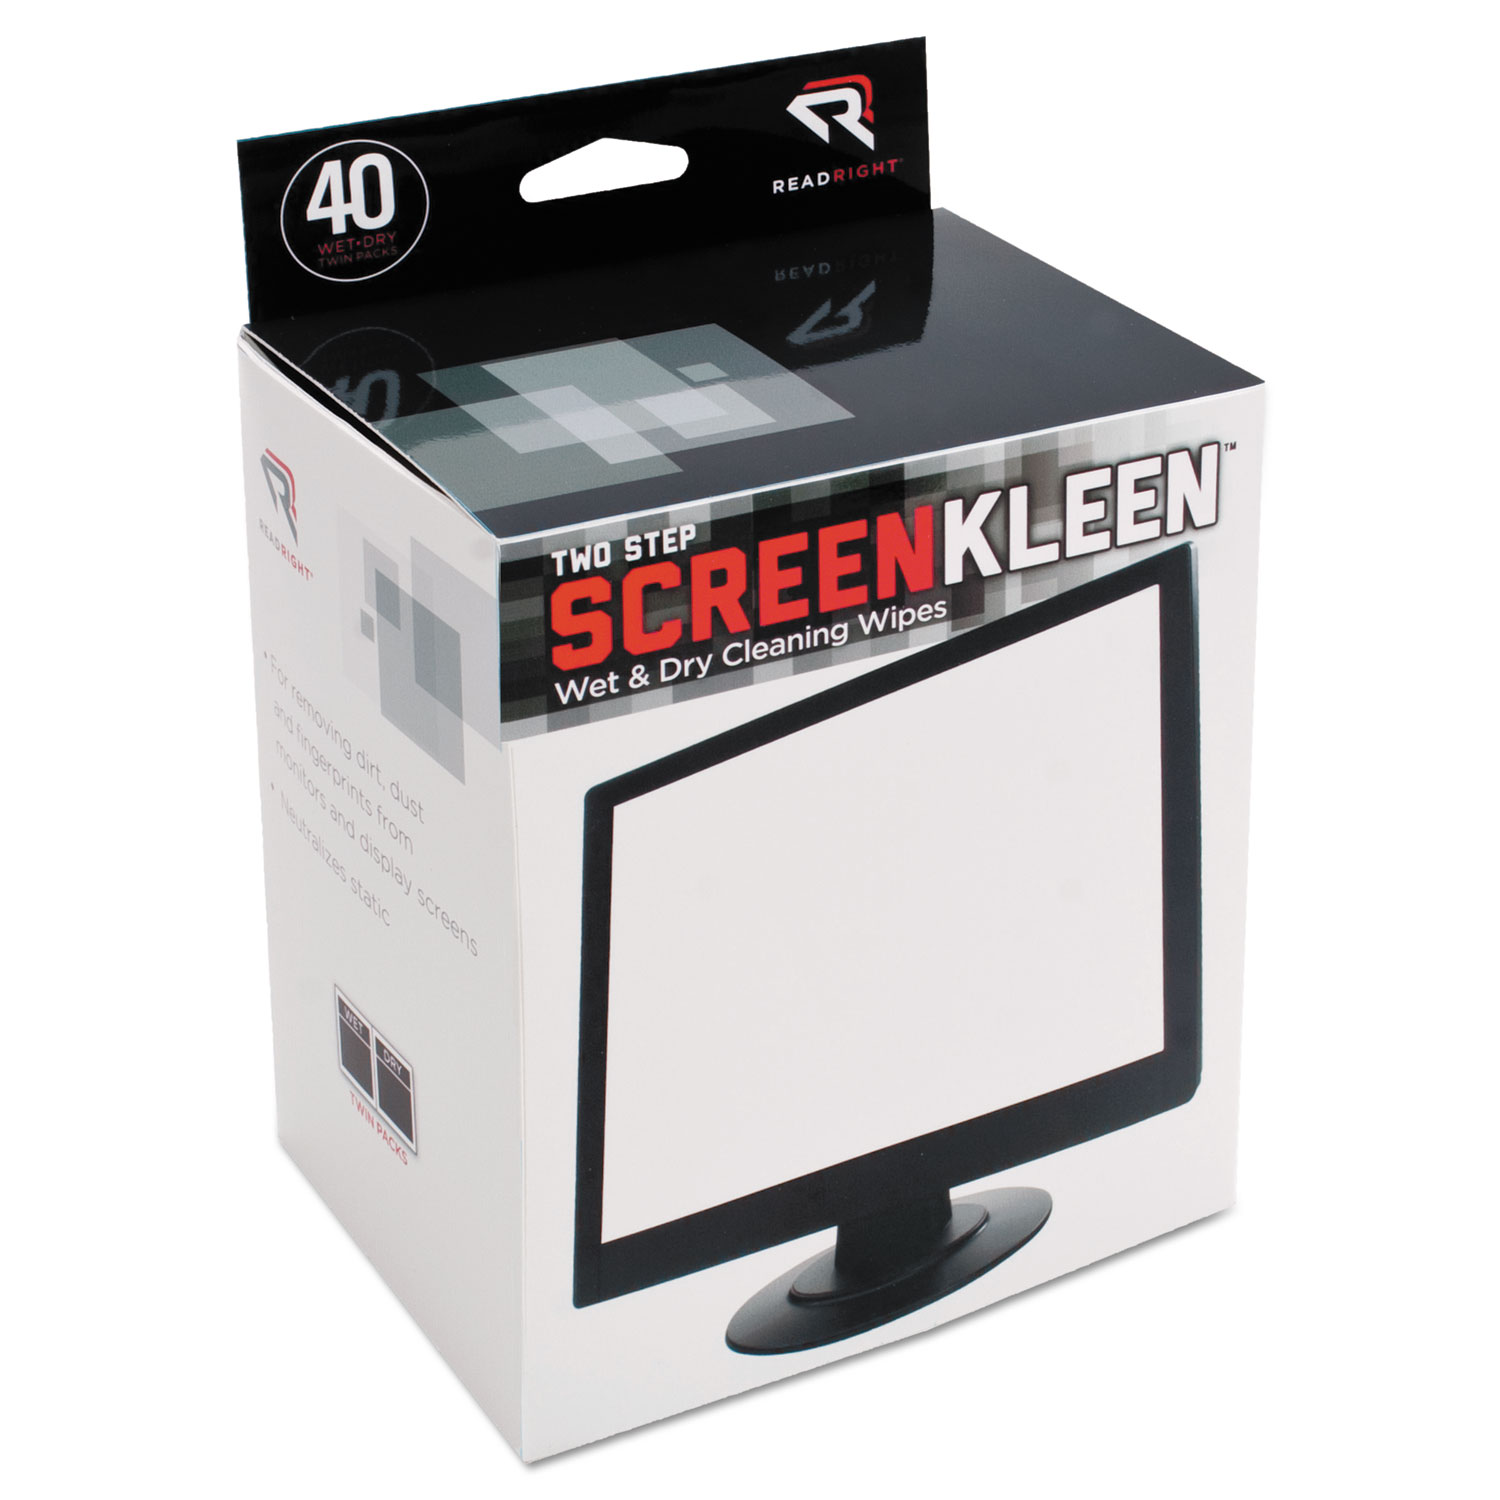  Read Right RR1305 Two Step ScreenKleen Wet and Dry Cleaning Wipes, 5 x 5, 40/Box (REARR1305) 